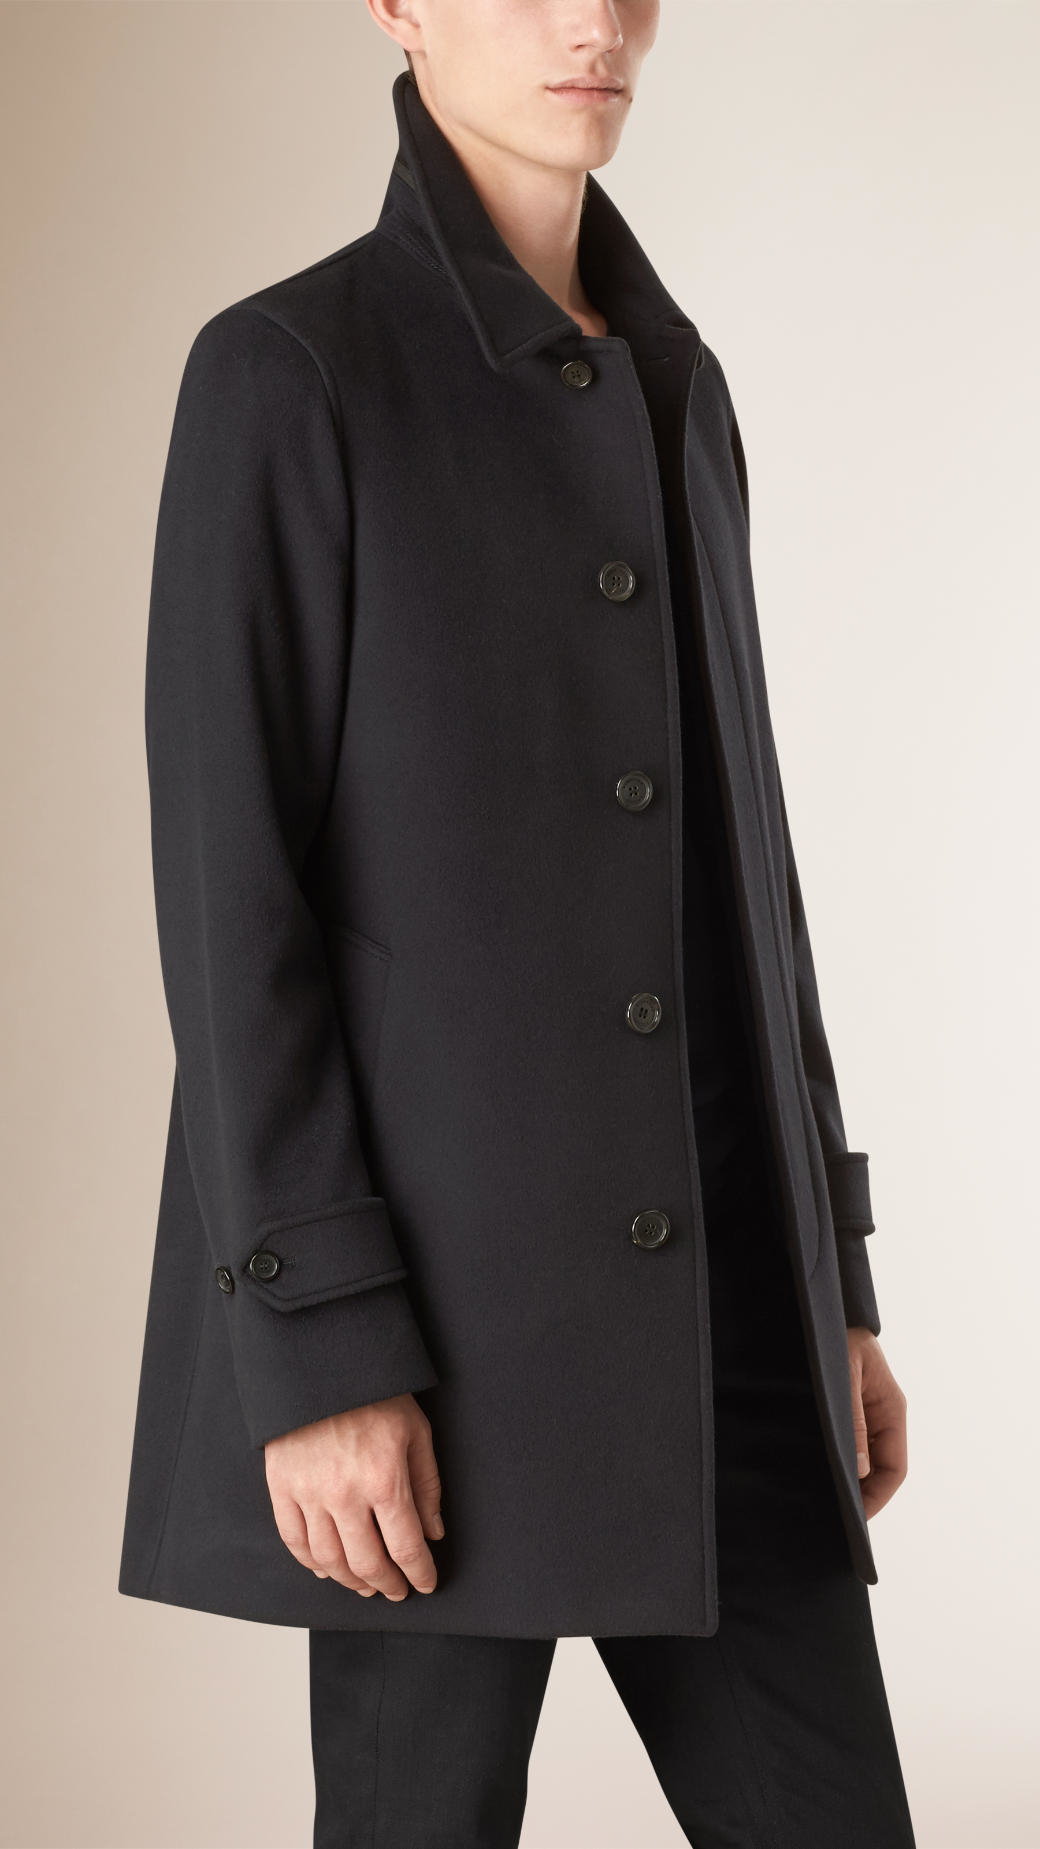 Burberry Wool Cashmere Car Coat in Navy (Blue) for Men - Lyst